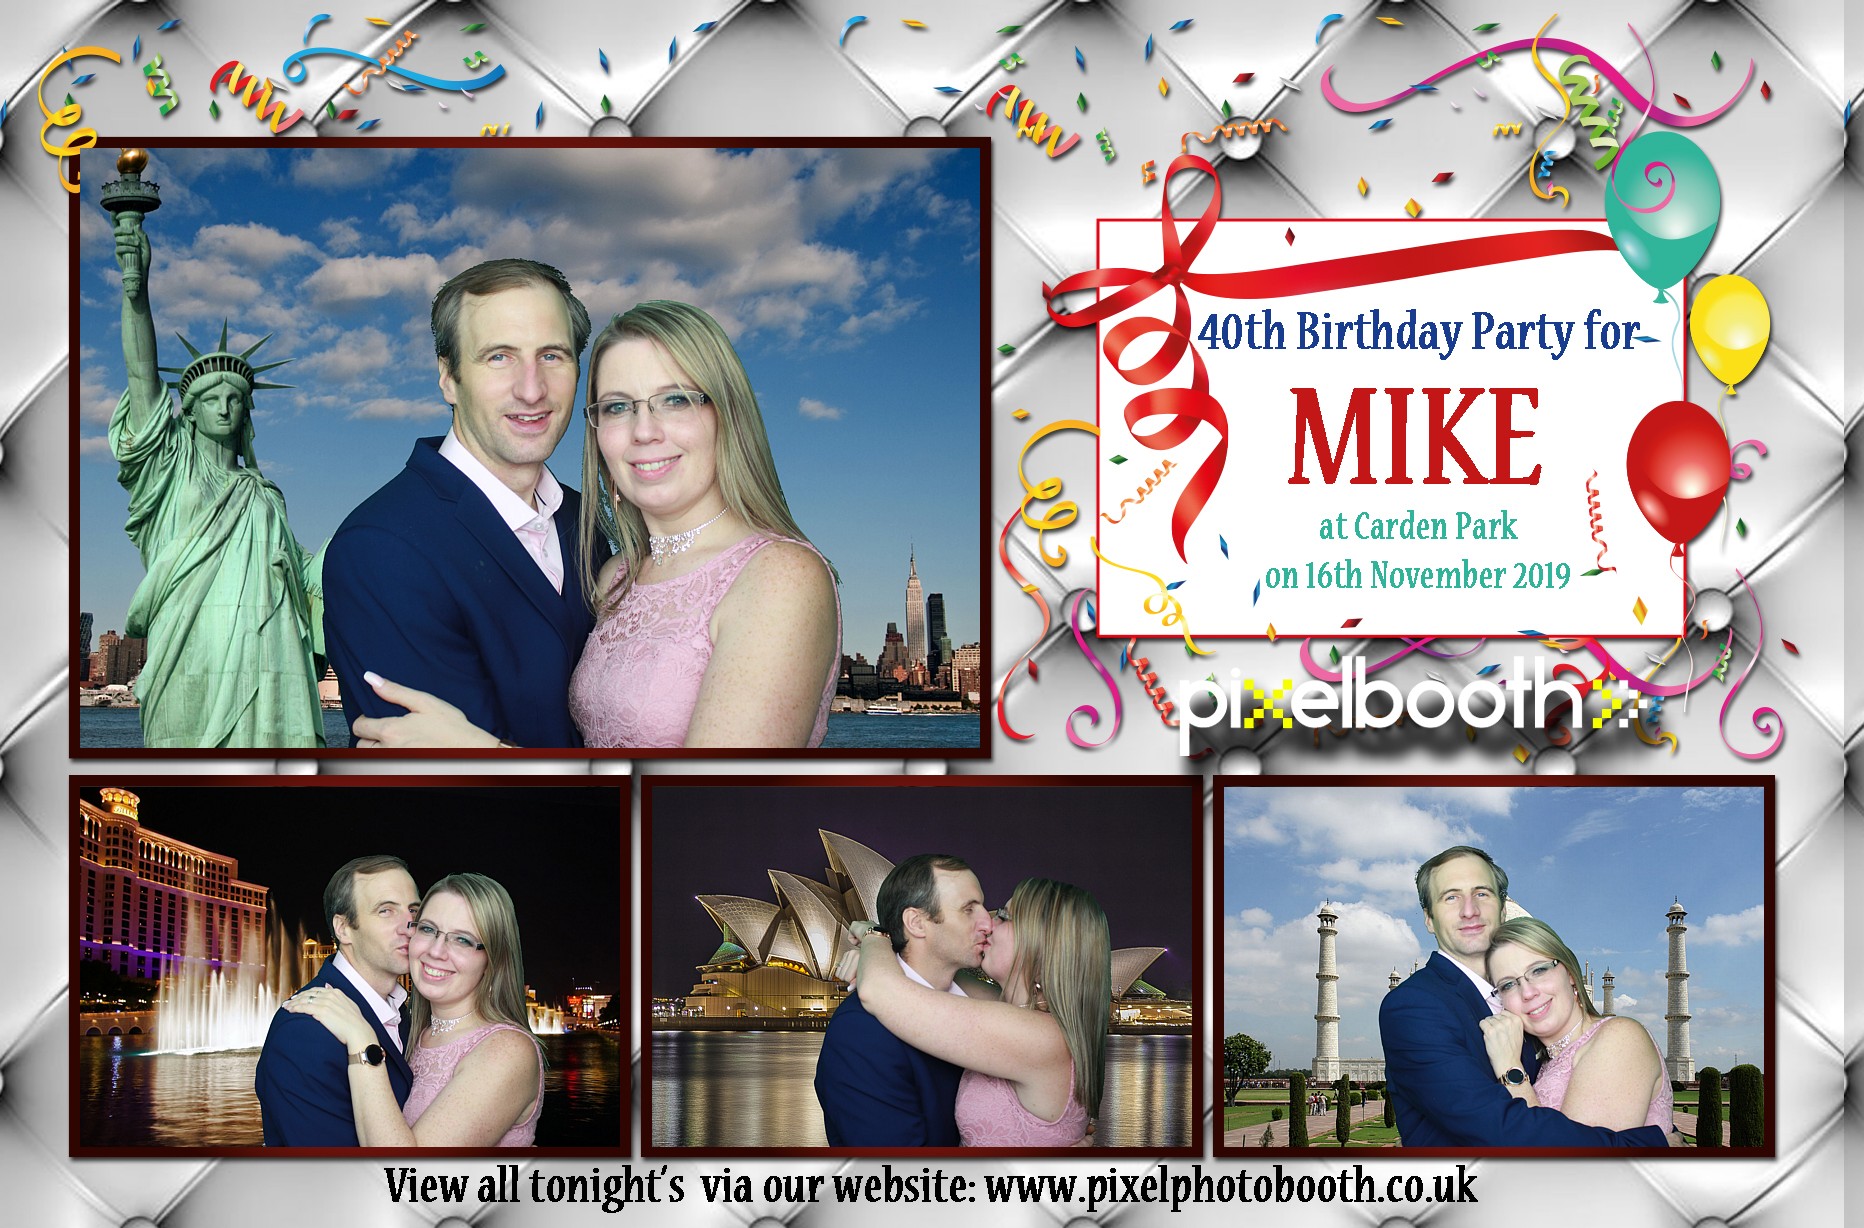 16th Nov 2019: 40th Birthday Party for Mike